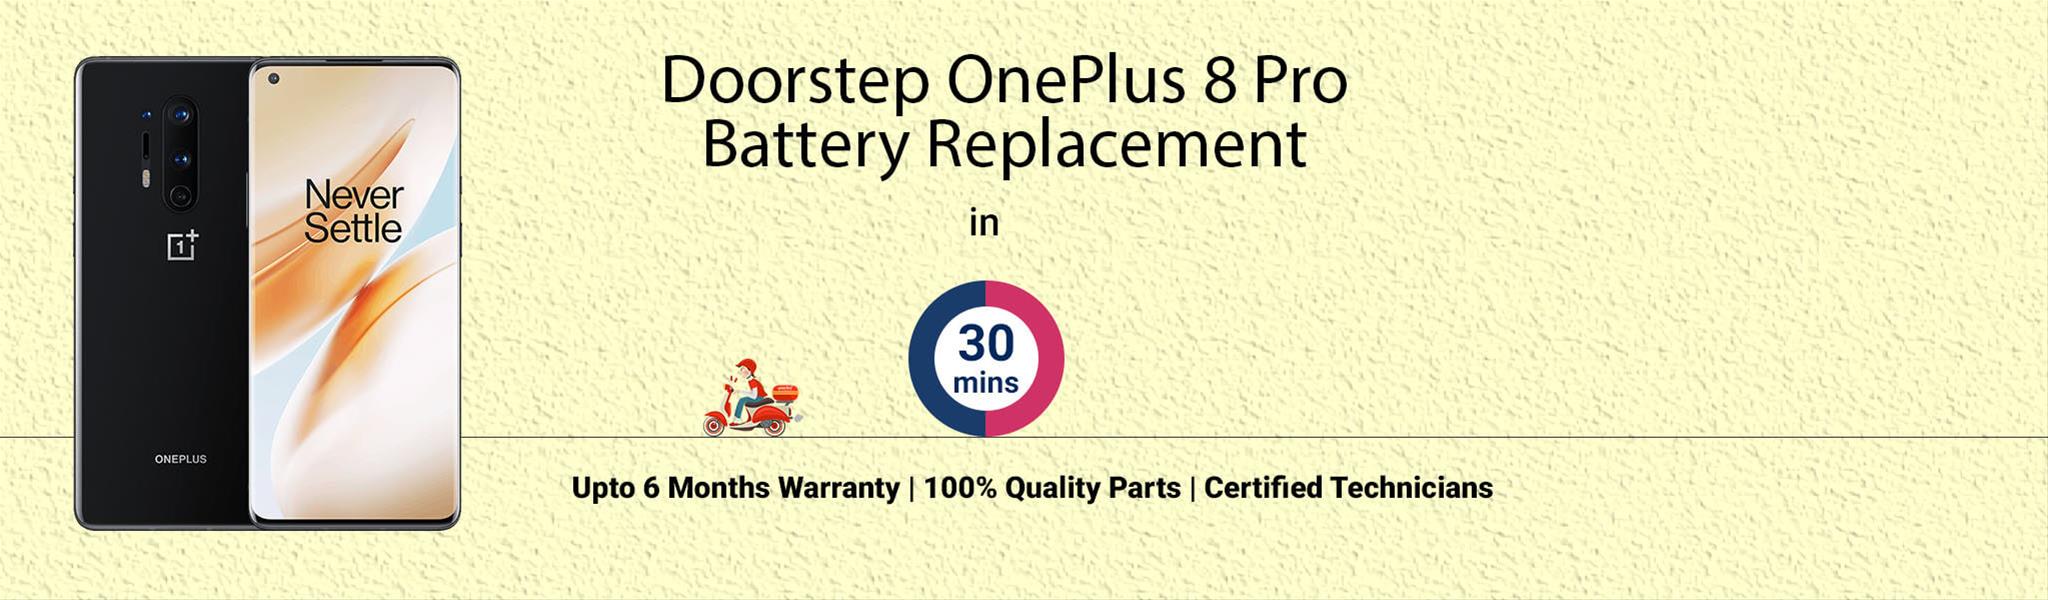 oneplus-8-pro-battery-replacement.jpg